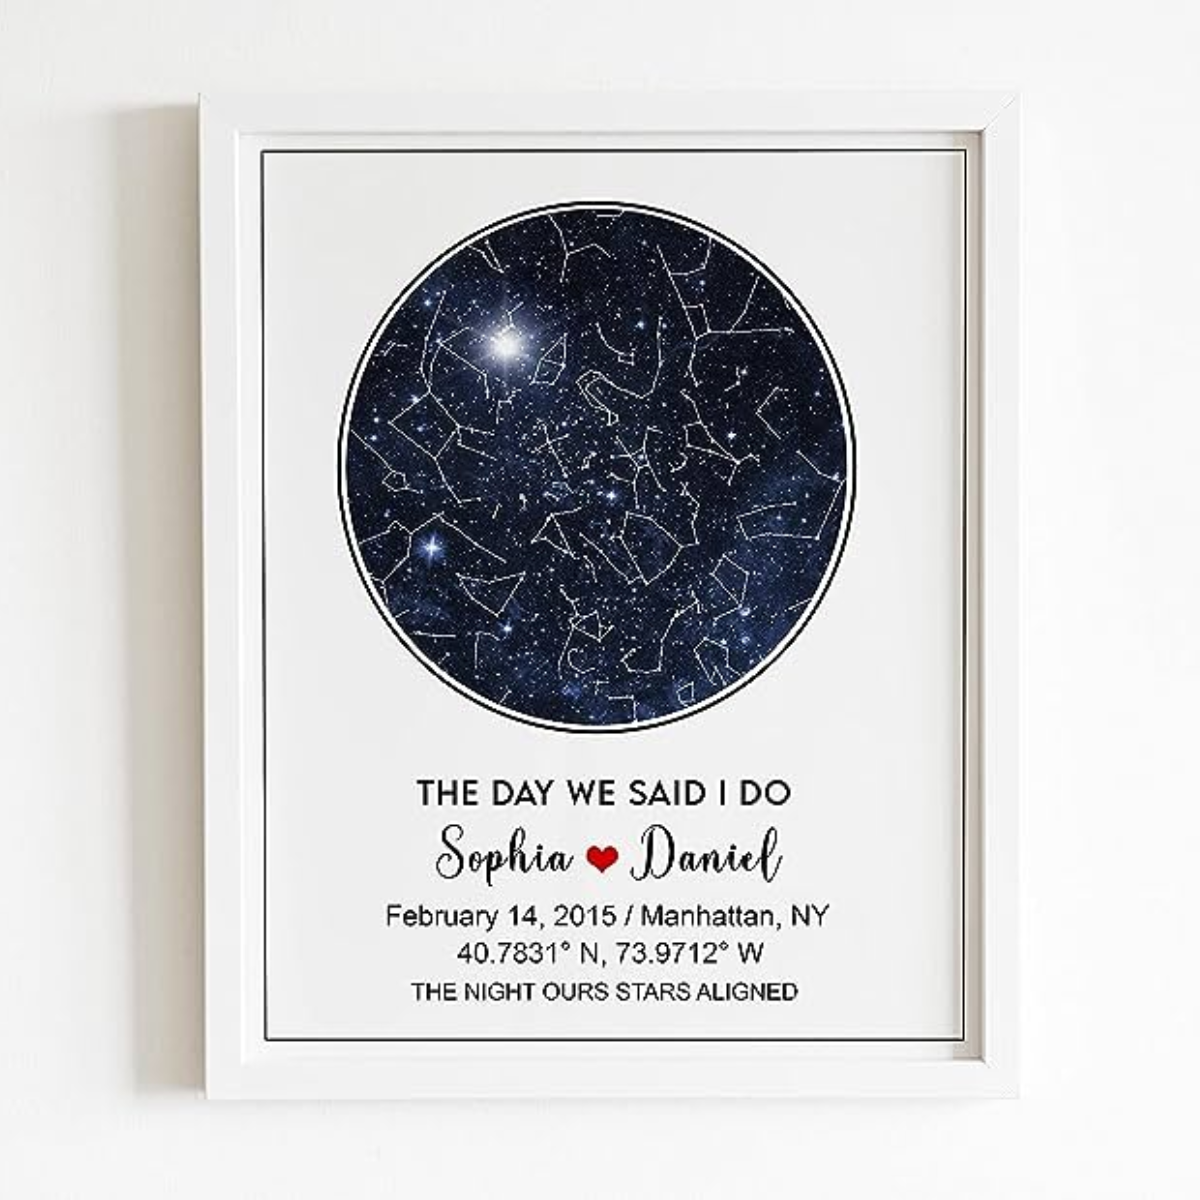 19. Celebrate a Lifetime of Love with a Personalized Star Map